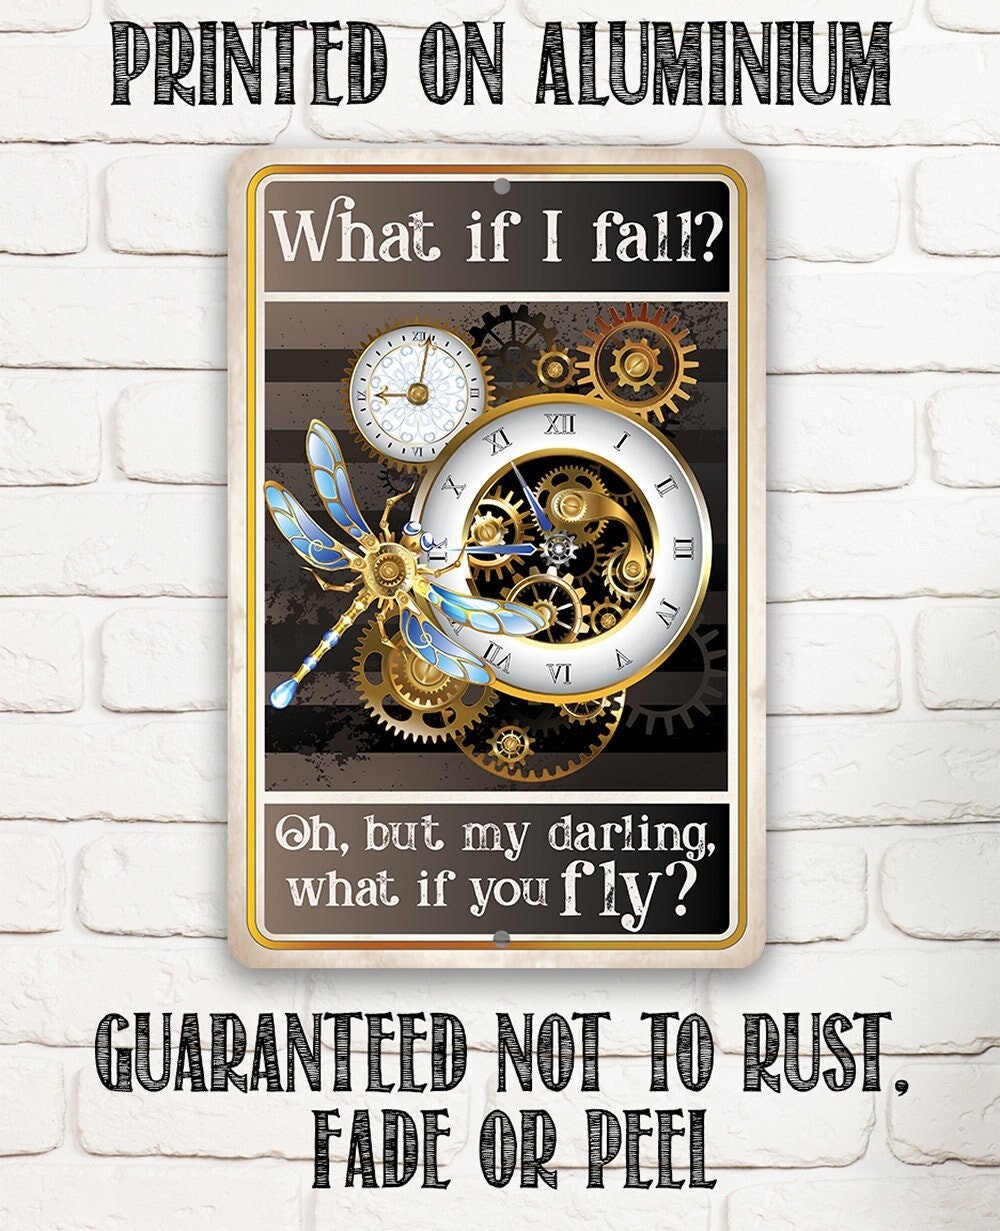 What If I Fall, Oh But My Darling, What If You Fly - 8" x 12" or 12" x 18" Aluminum Tin Awesome Metal Poster Lone Star Art 